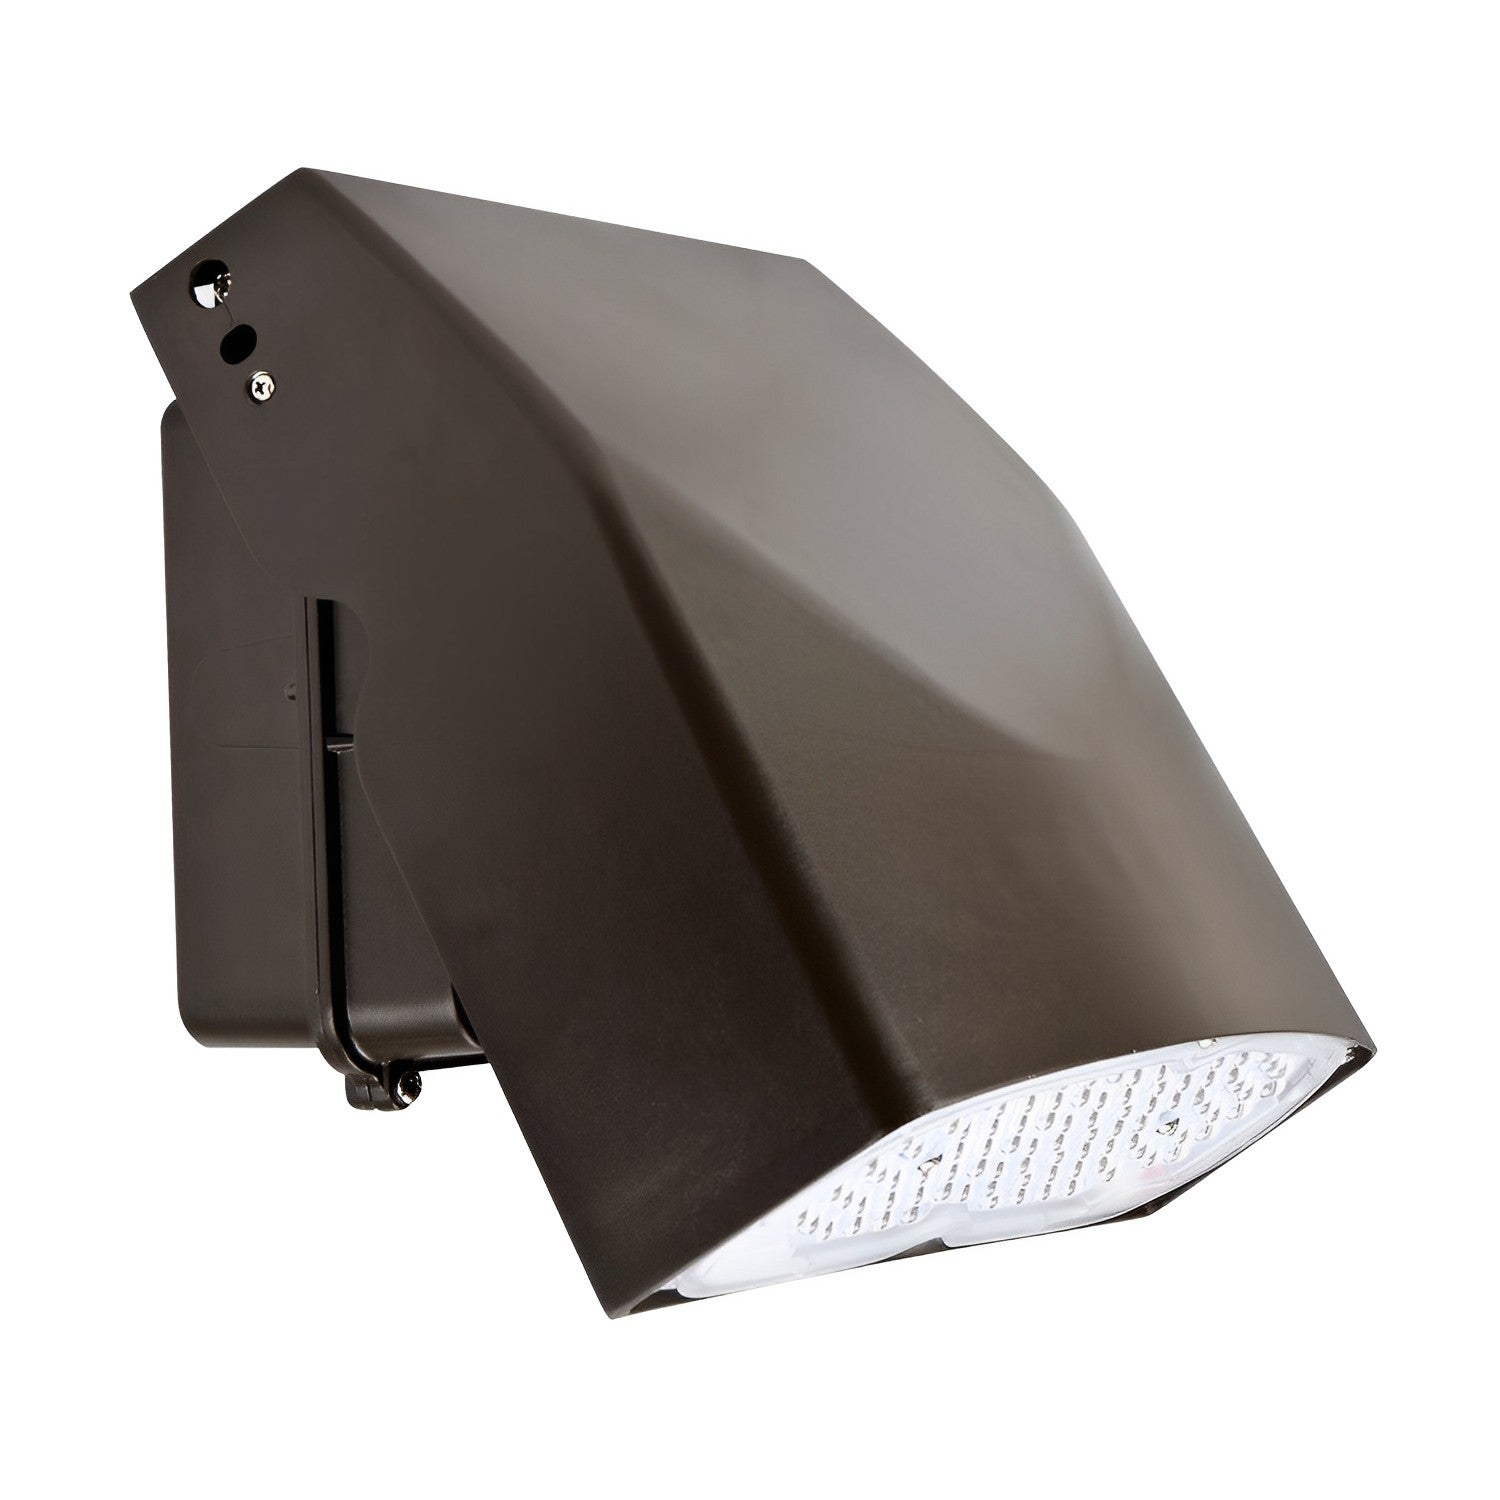 Image of 27W adjustable wall pack or led wall pack light fixture